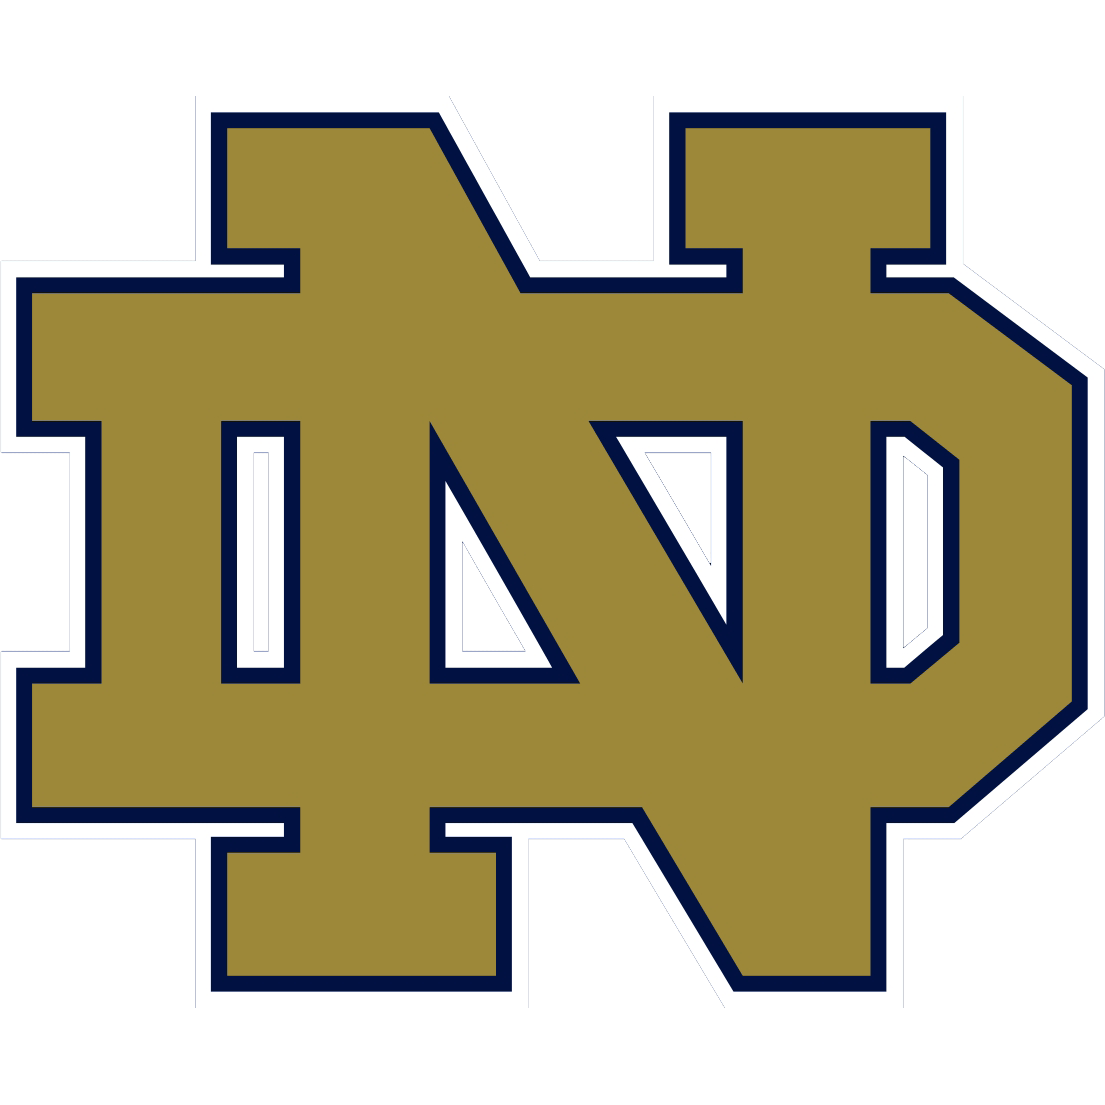 Notre Dame Logo - Notre Dame Clover Logo Pictures To Pin On Pinterest Logo Image ...